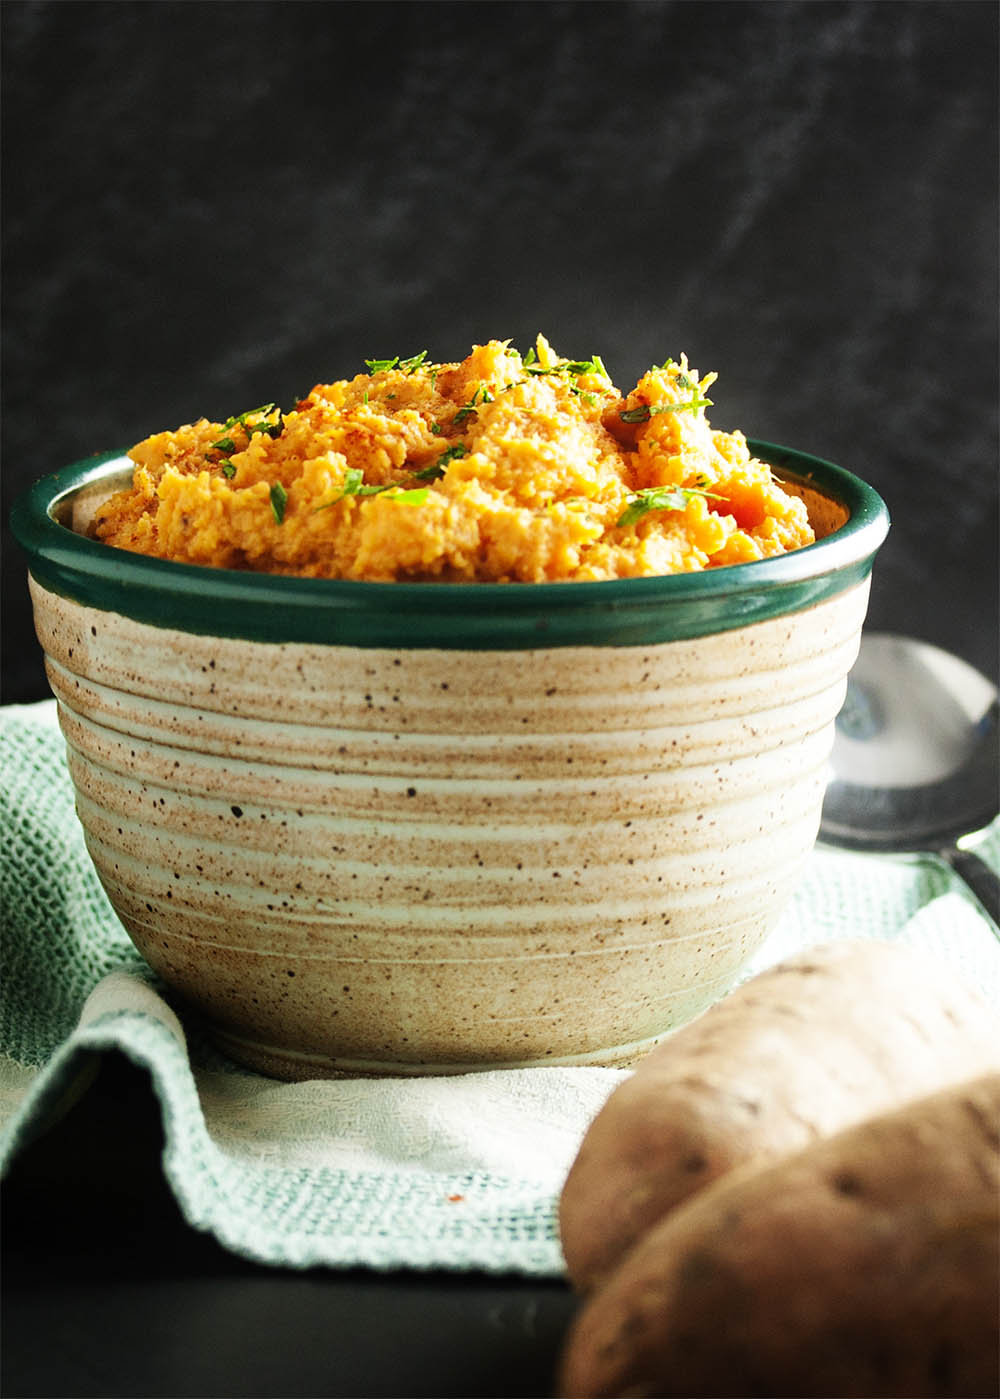 Chipotle Mashed Sweet Potatoes - Spicy, smoky chipotle in adobo sauce provides just the right amount smoky heat to balance out these creamy and buttery sweet potatoes. Excellent when paired with roasted or grilled meats! | justalittlebitofbacon.com